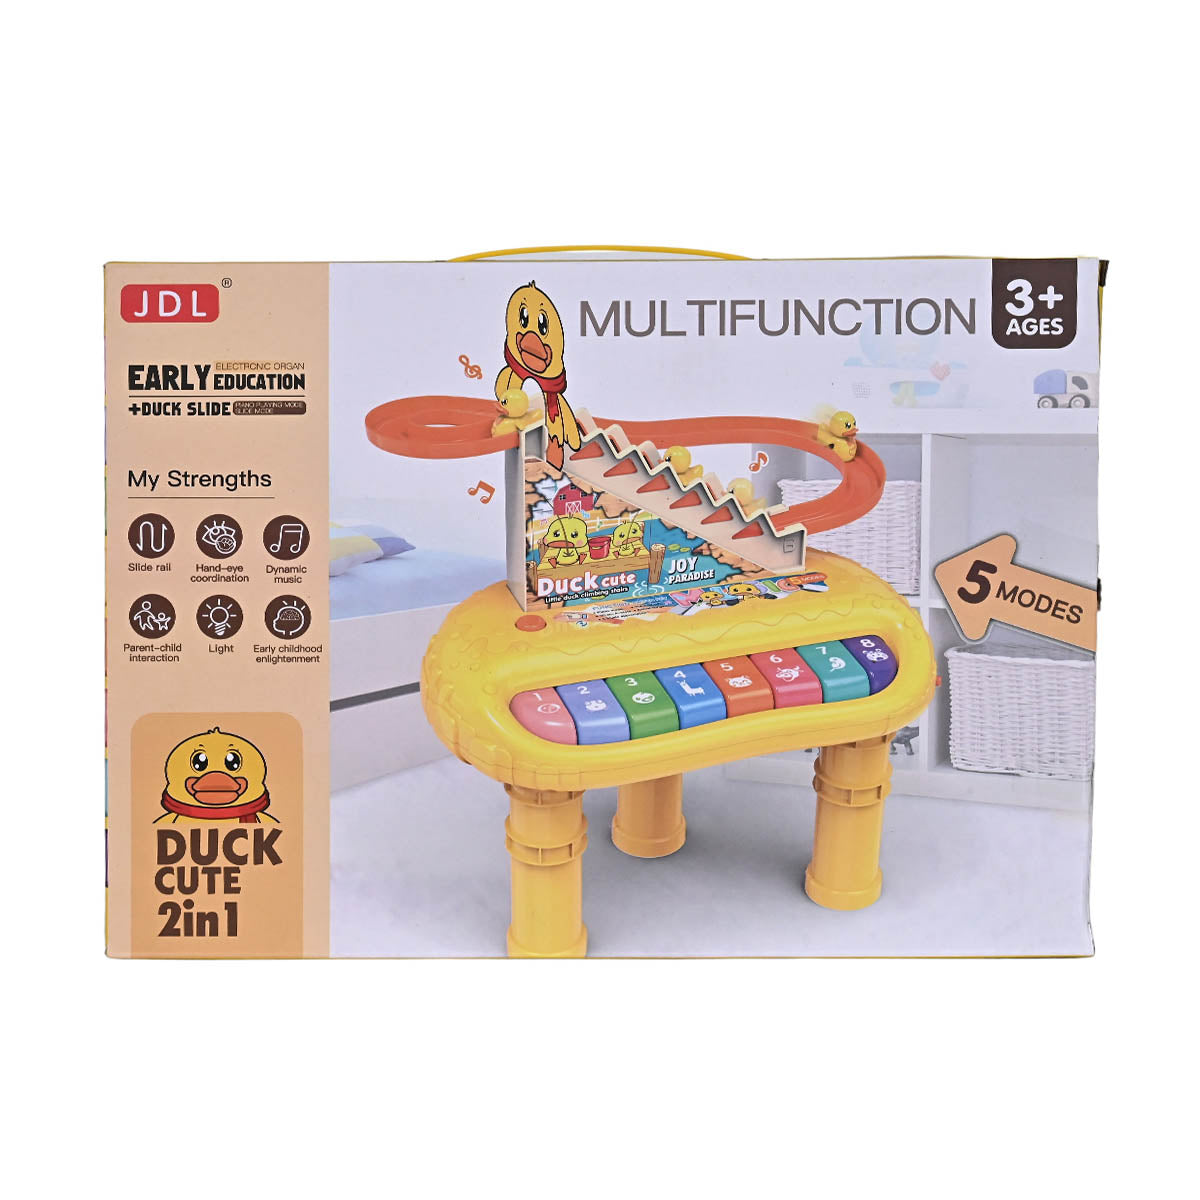 2 in 1 Multifunction Cute Duck With Electronic Piano